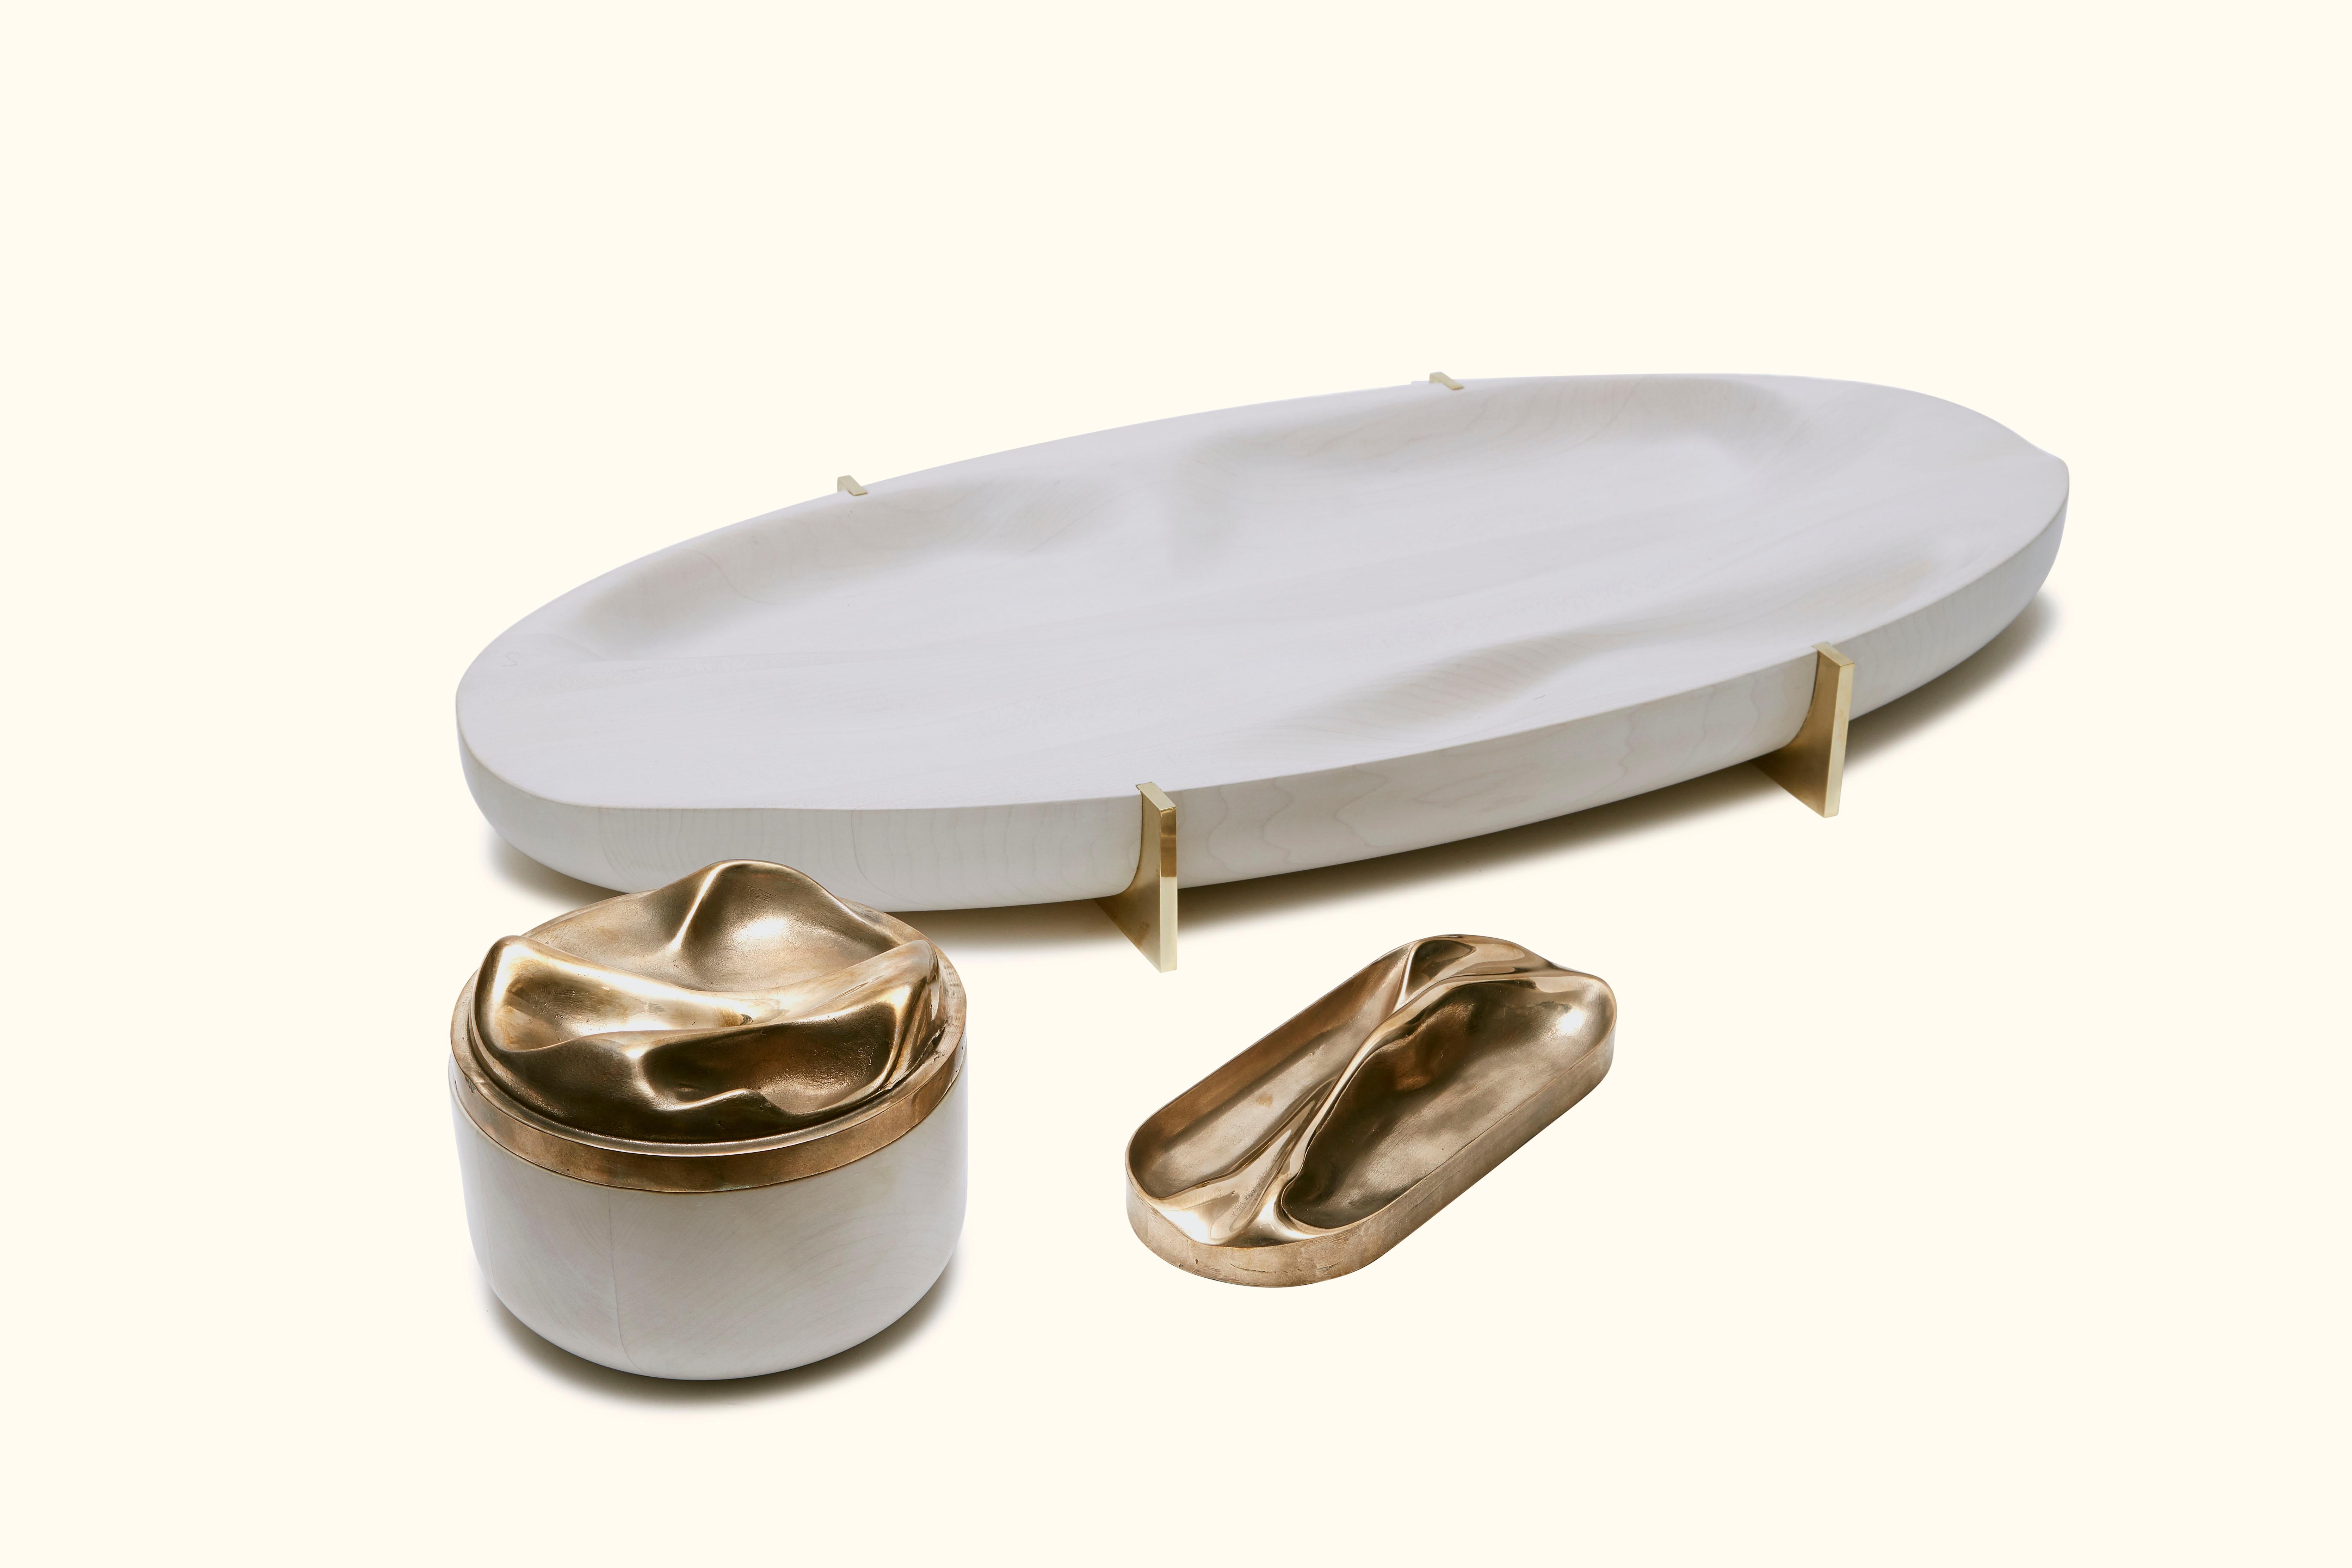 Bleached Maple and Brass Oval Tray by Vincent Pocsik for Lawson-Fenning 5